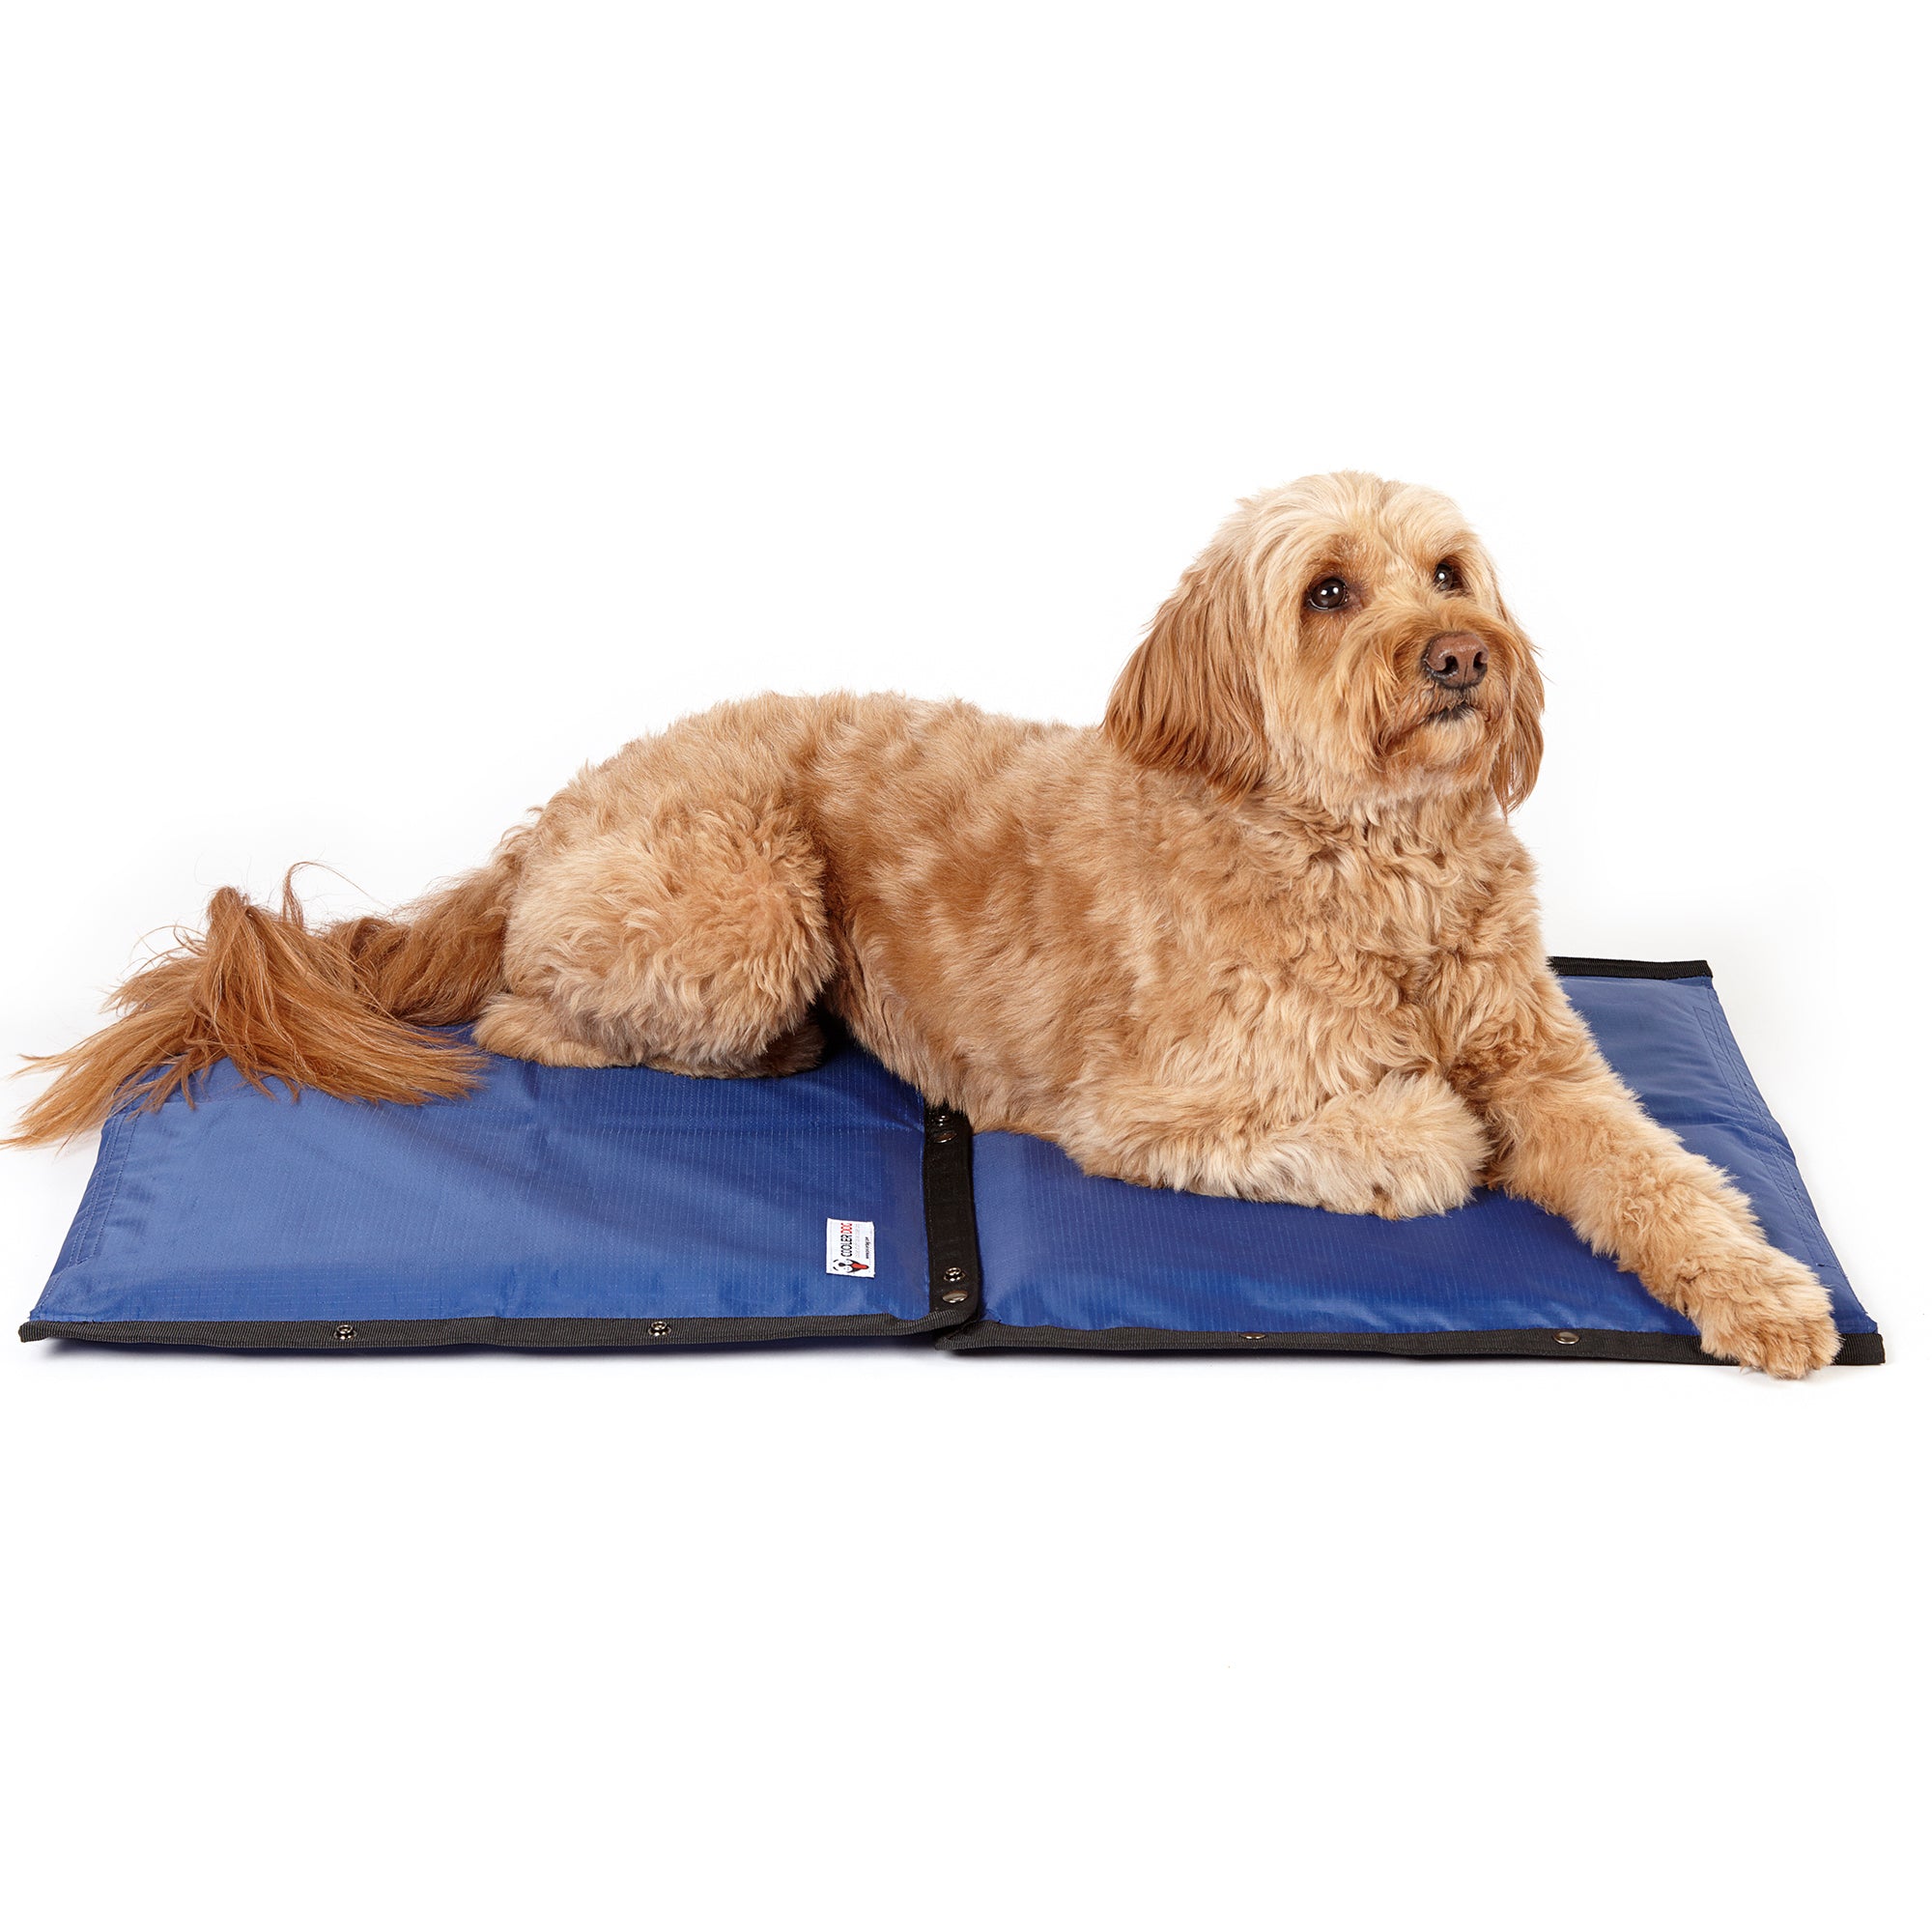 2 CoolerDog Hydro Cooling Mats, connected, with medium sized dog resting on top